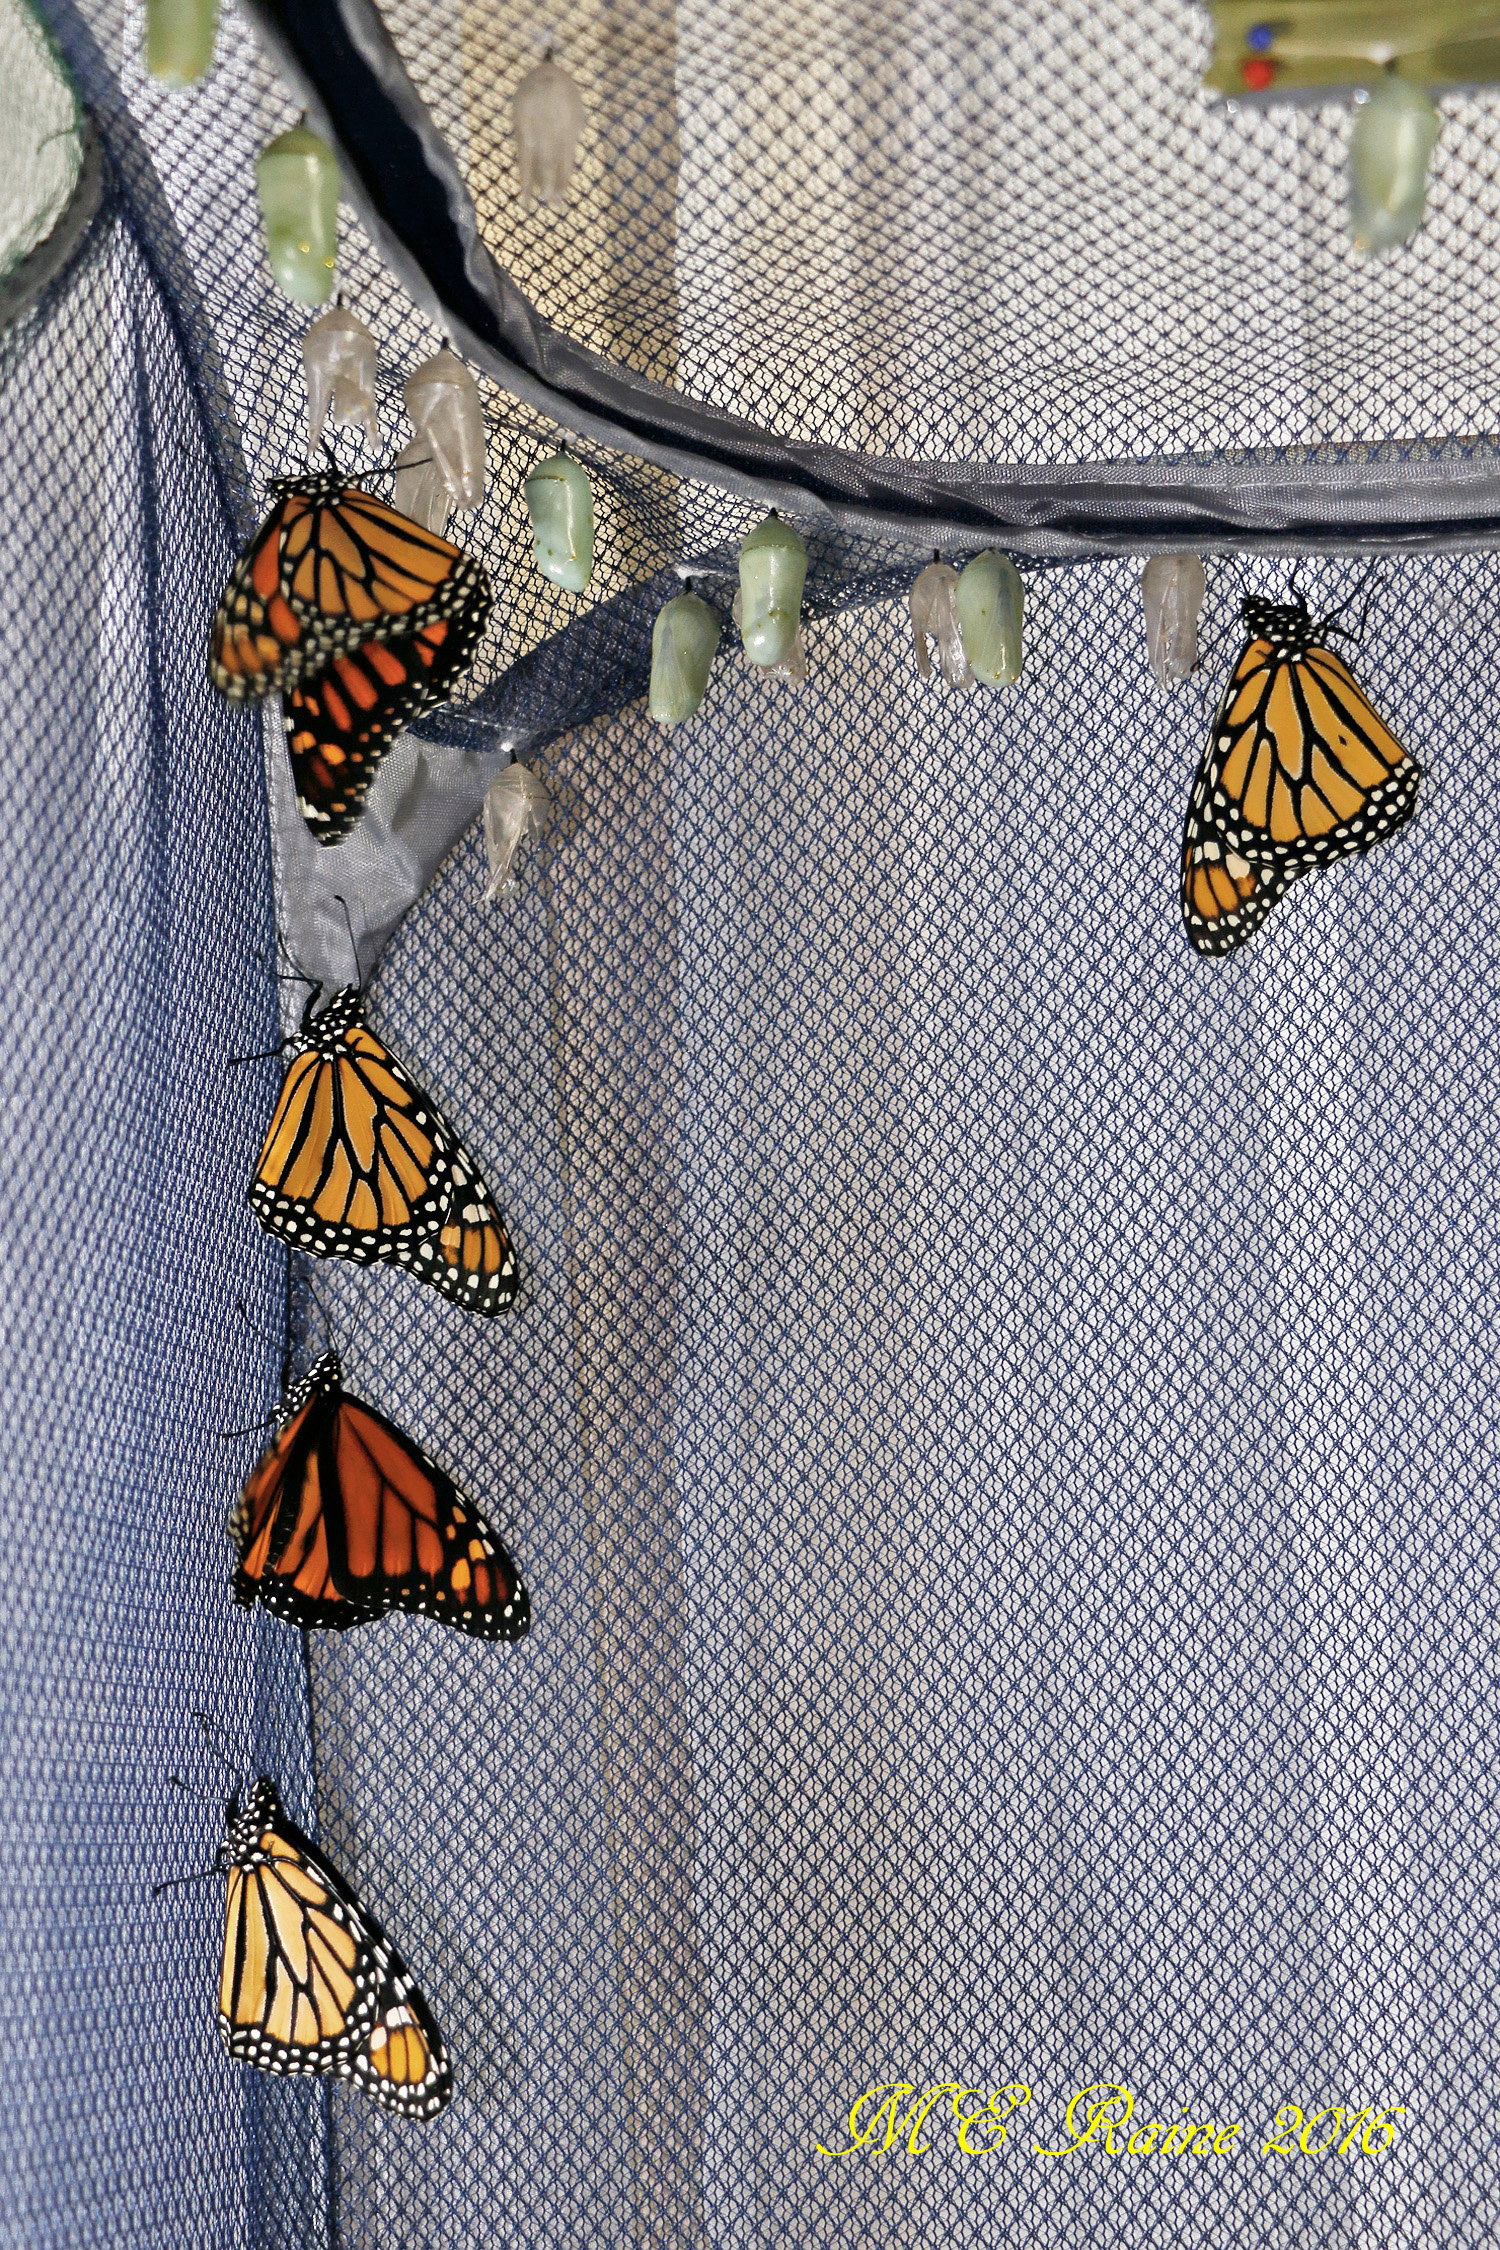 monarch-butterfly-of-maturity-in-safe-house-1-nos-9-12-n-13th-091916-10am-ok-wm